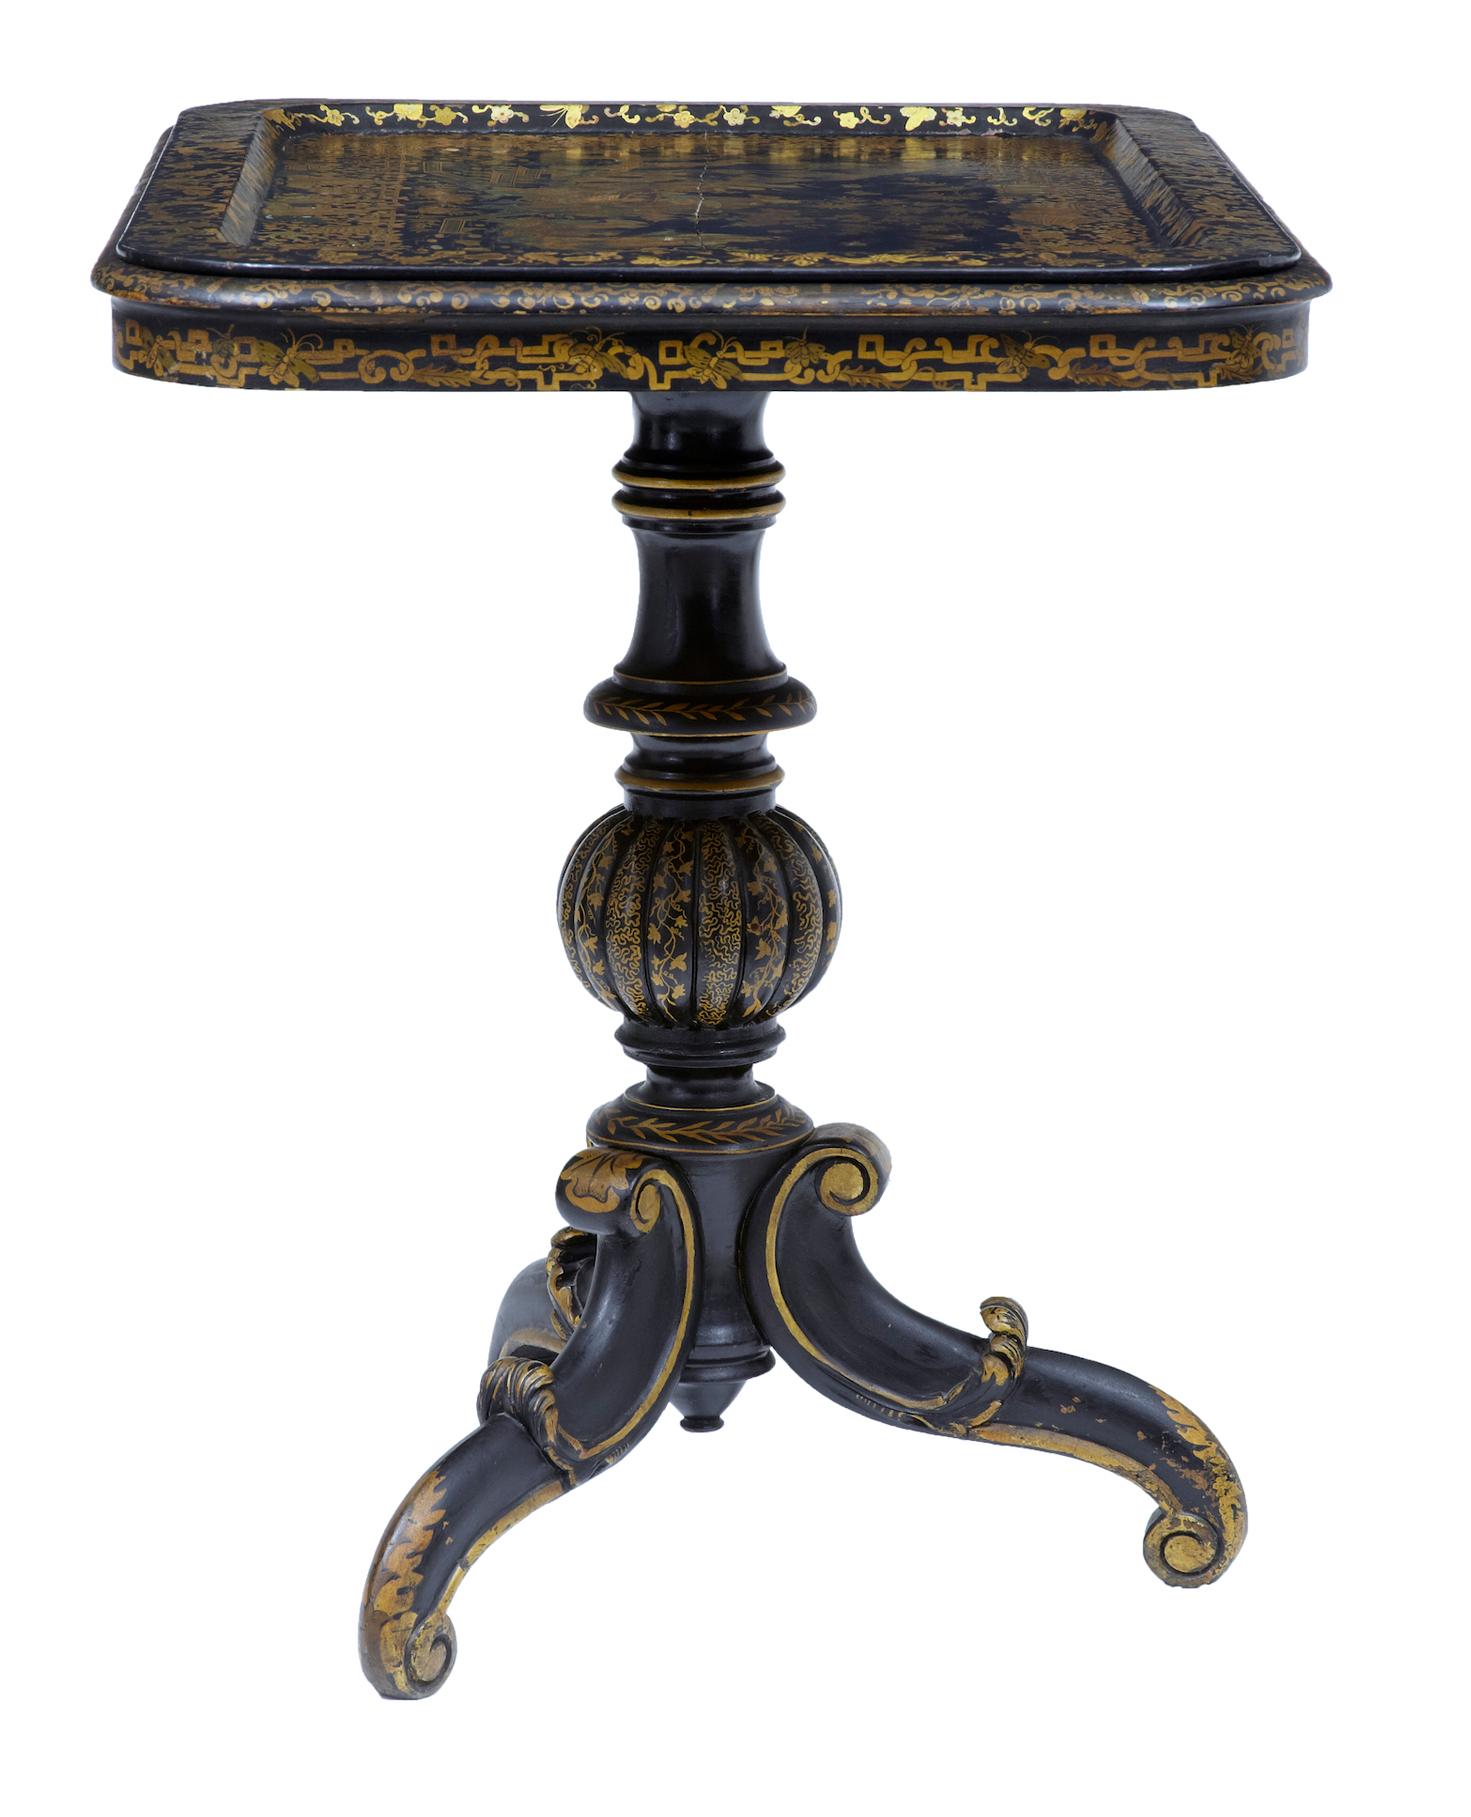 19th century Chinese black lacquered tray table circa 1880.

Fantastic quality tray on stand, profusely decorated with Chinese traditional scenes/foliage and butterflies.

Tray does have a split but in our opinion does not detract from the